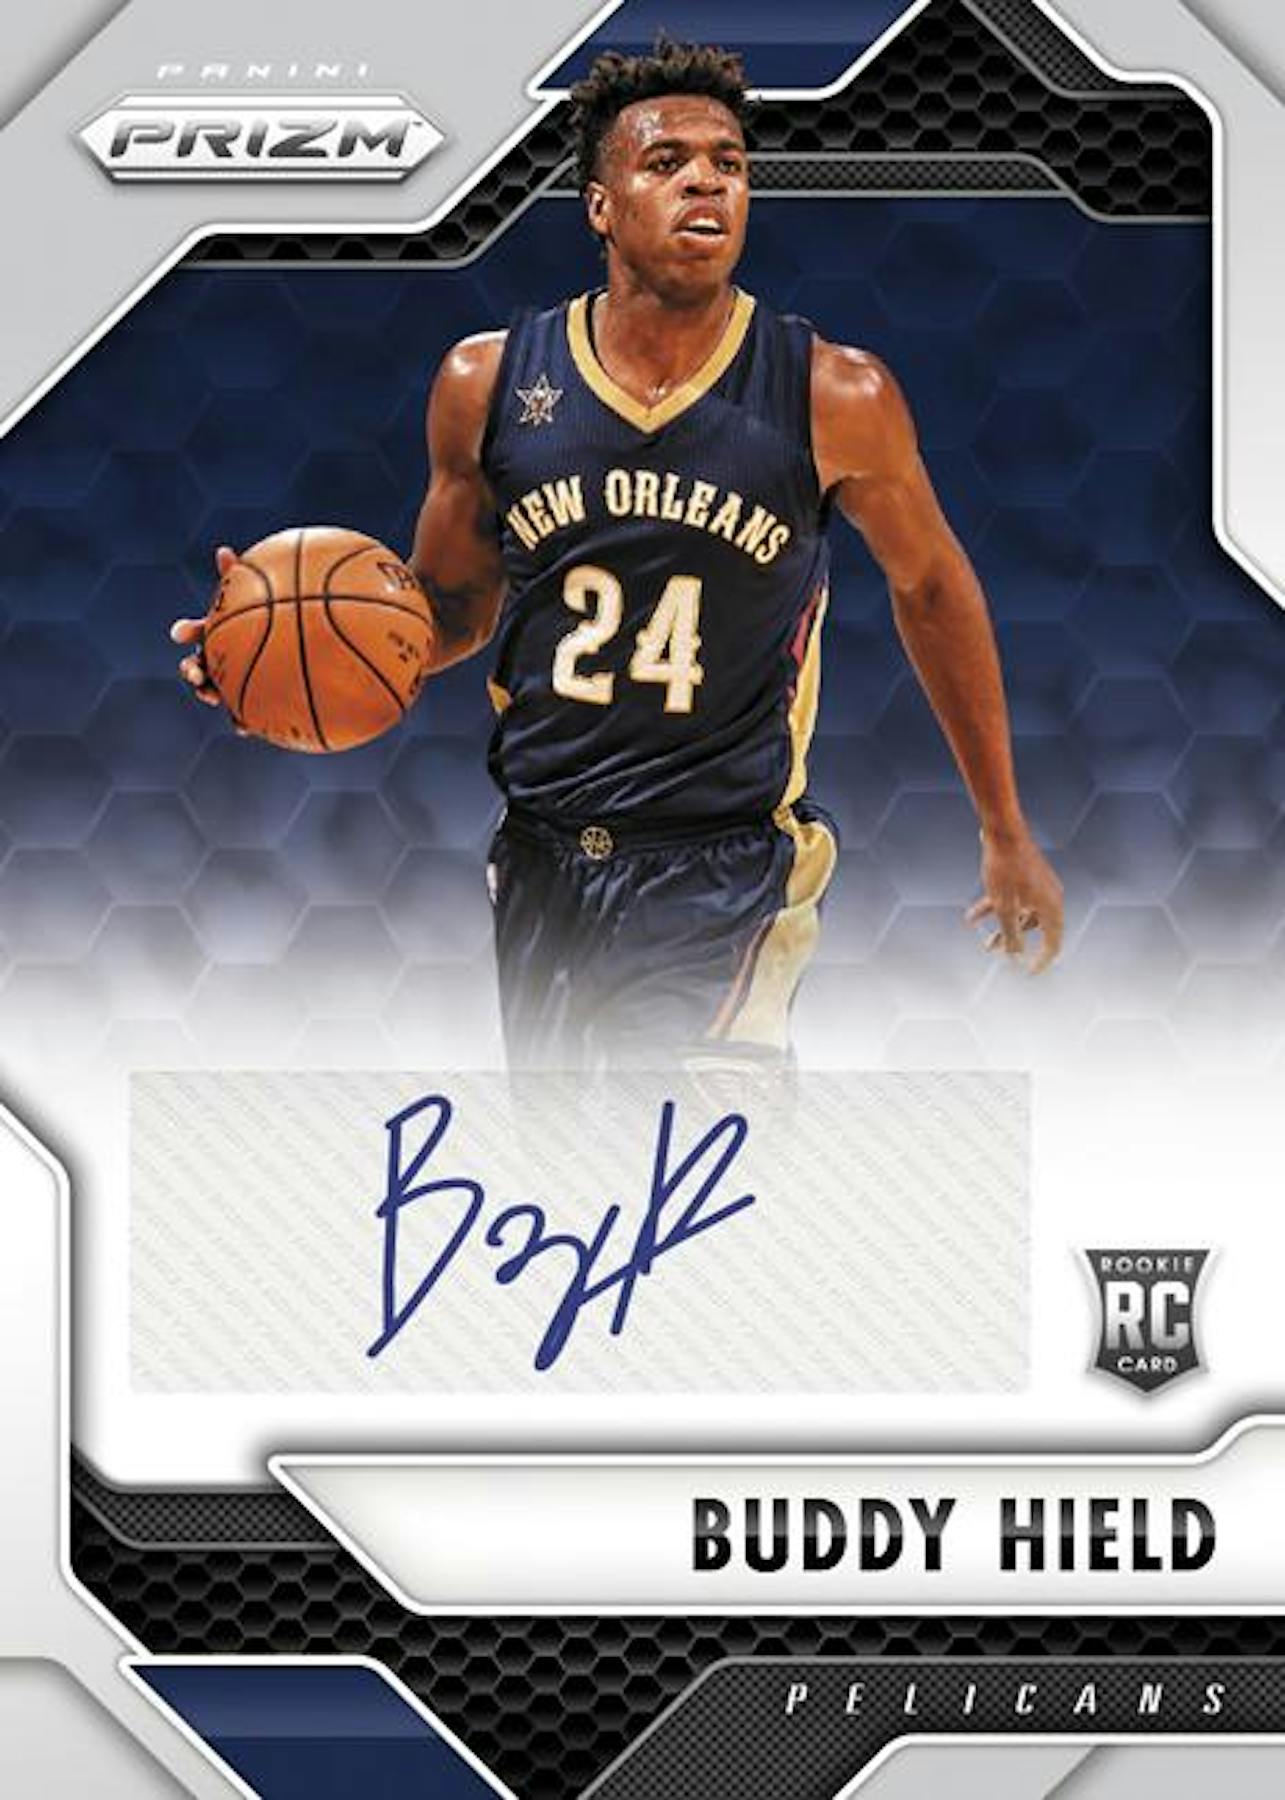 2016-17 Panini Prizm #86 BUDDY HIELD Rookie Jersey Card Pelicans RC